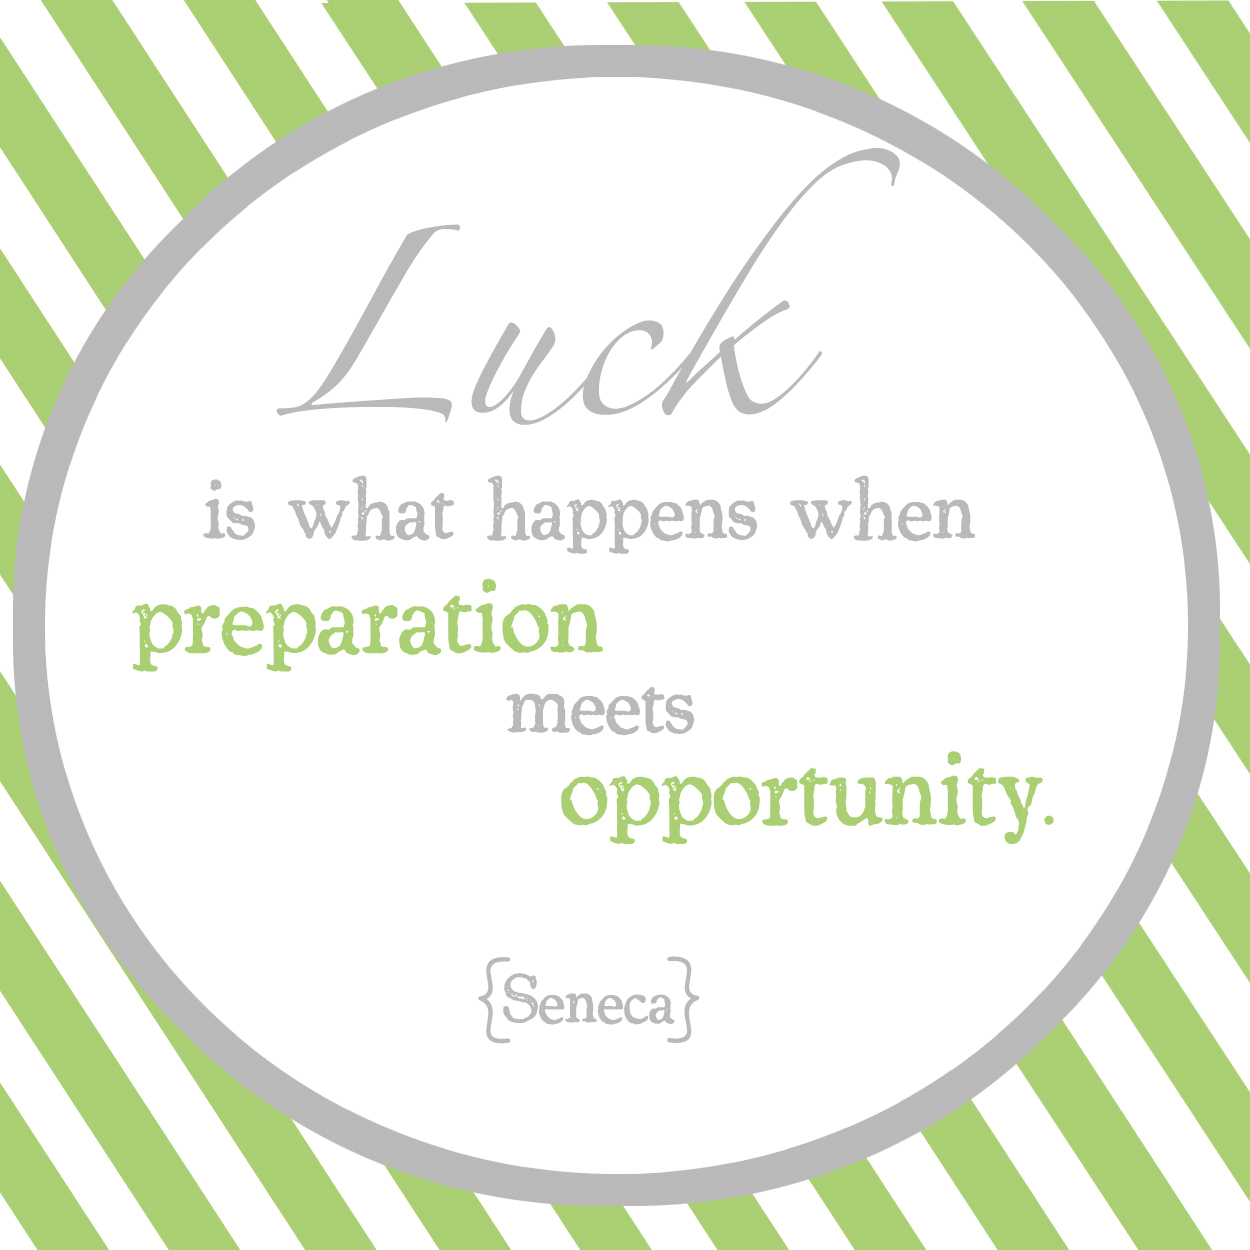 Good Luck Cheerleading Competition Quotes. QuotesGram